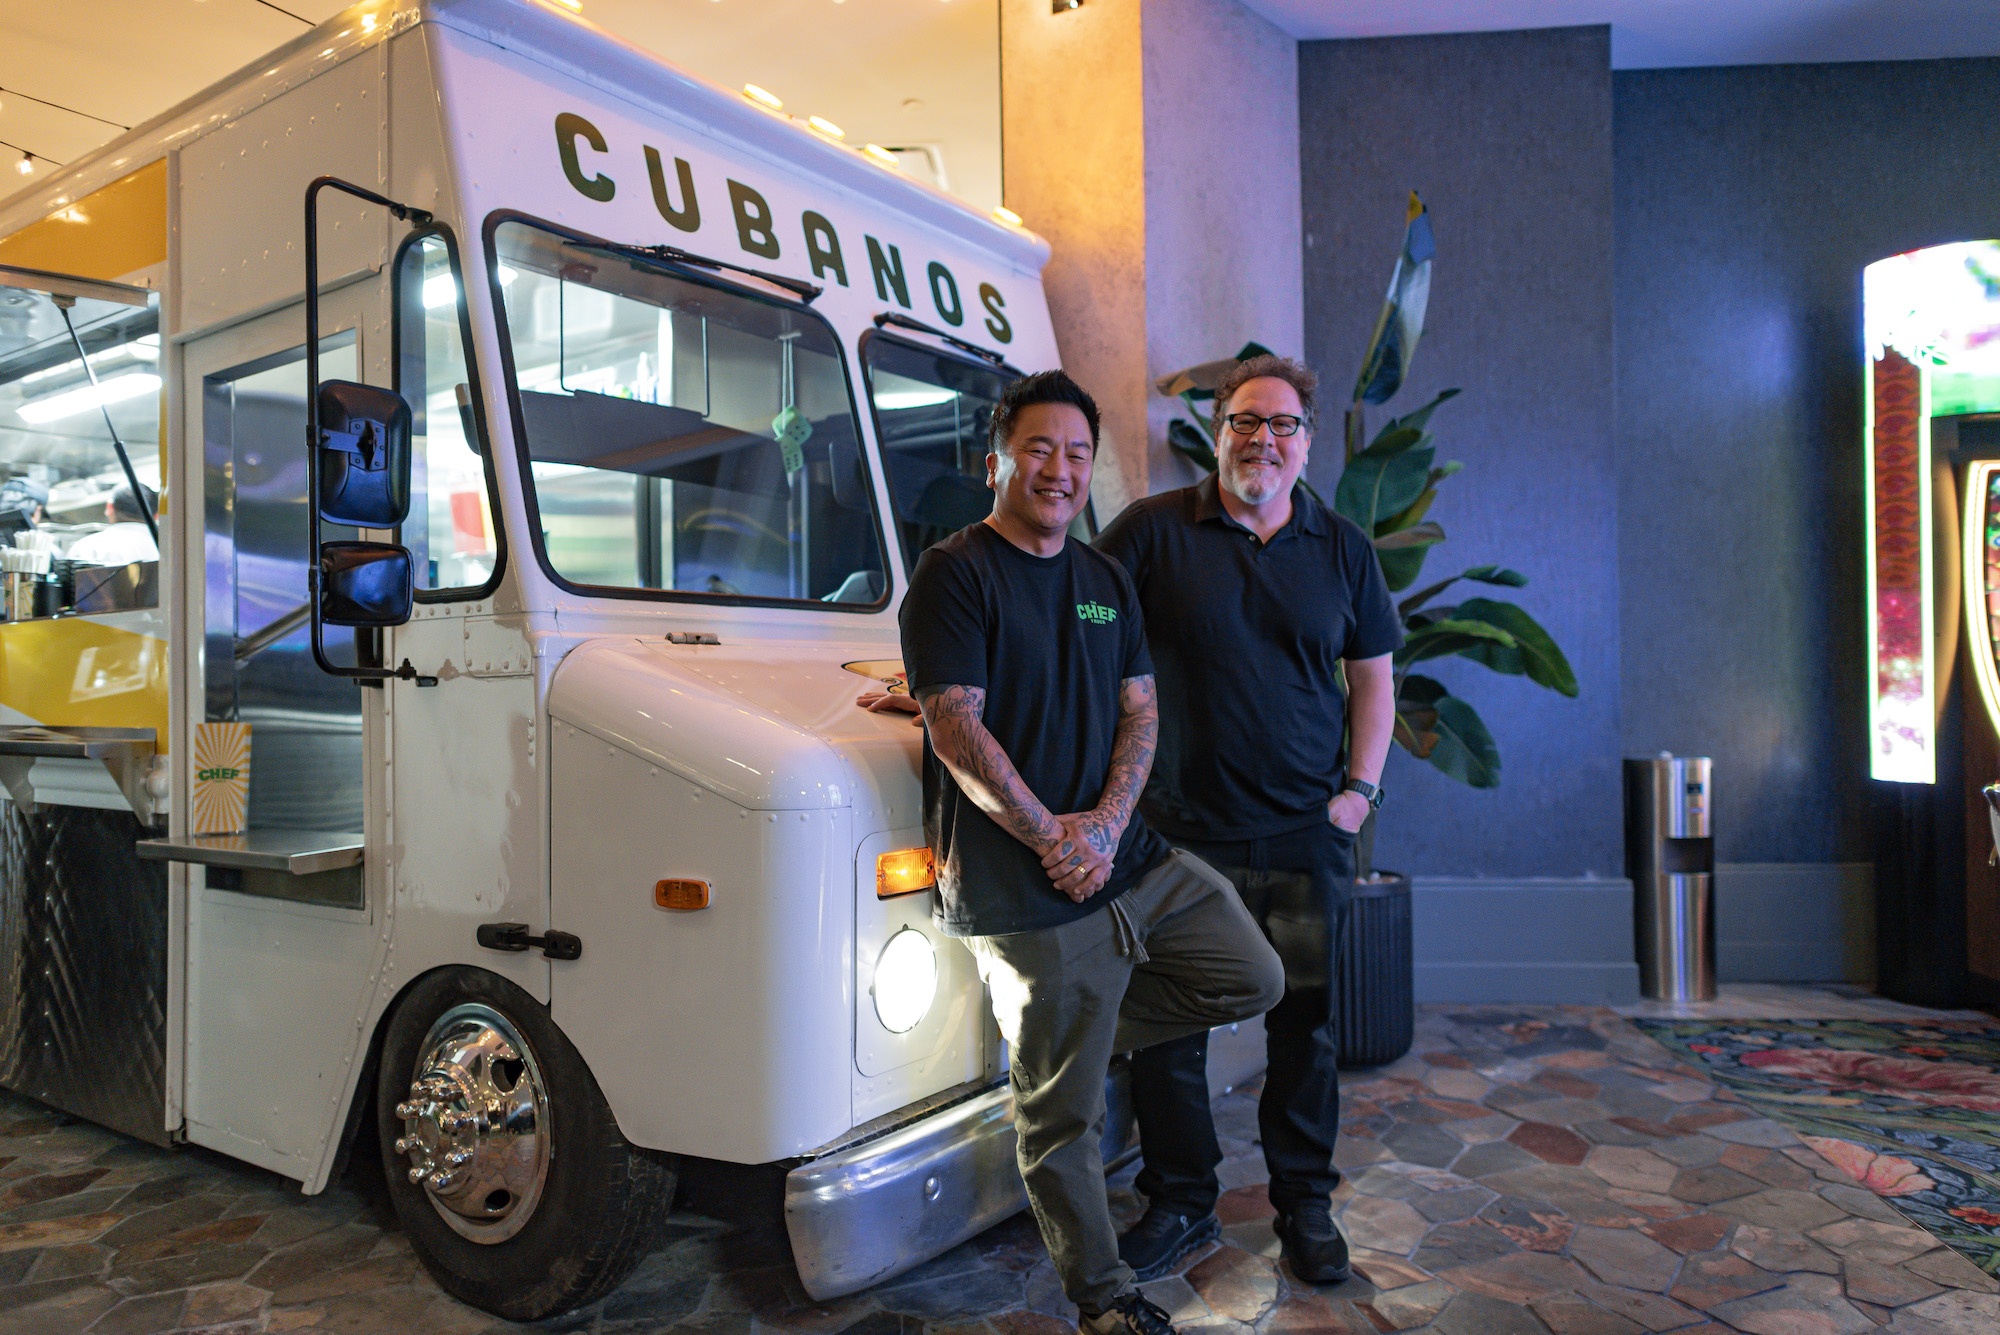 Roy Choi of 'The Chef Show' Shares His Essential Items